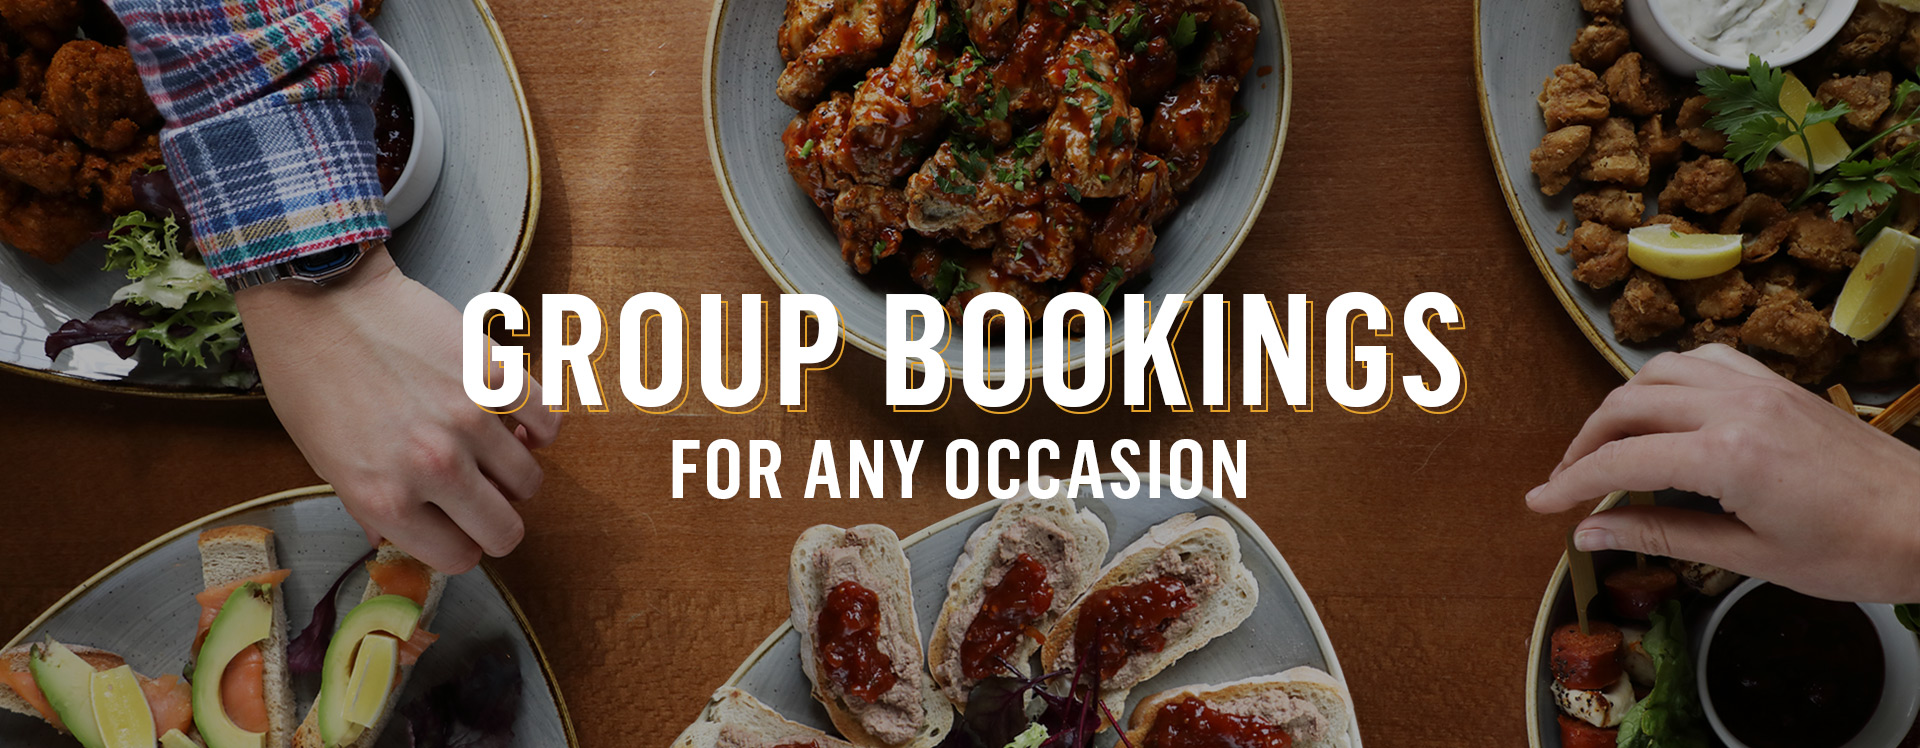 Group Bookings at The Feathers